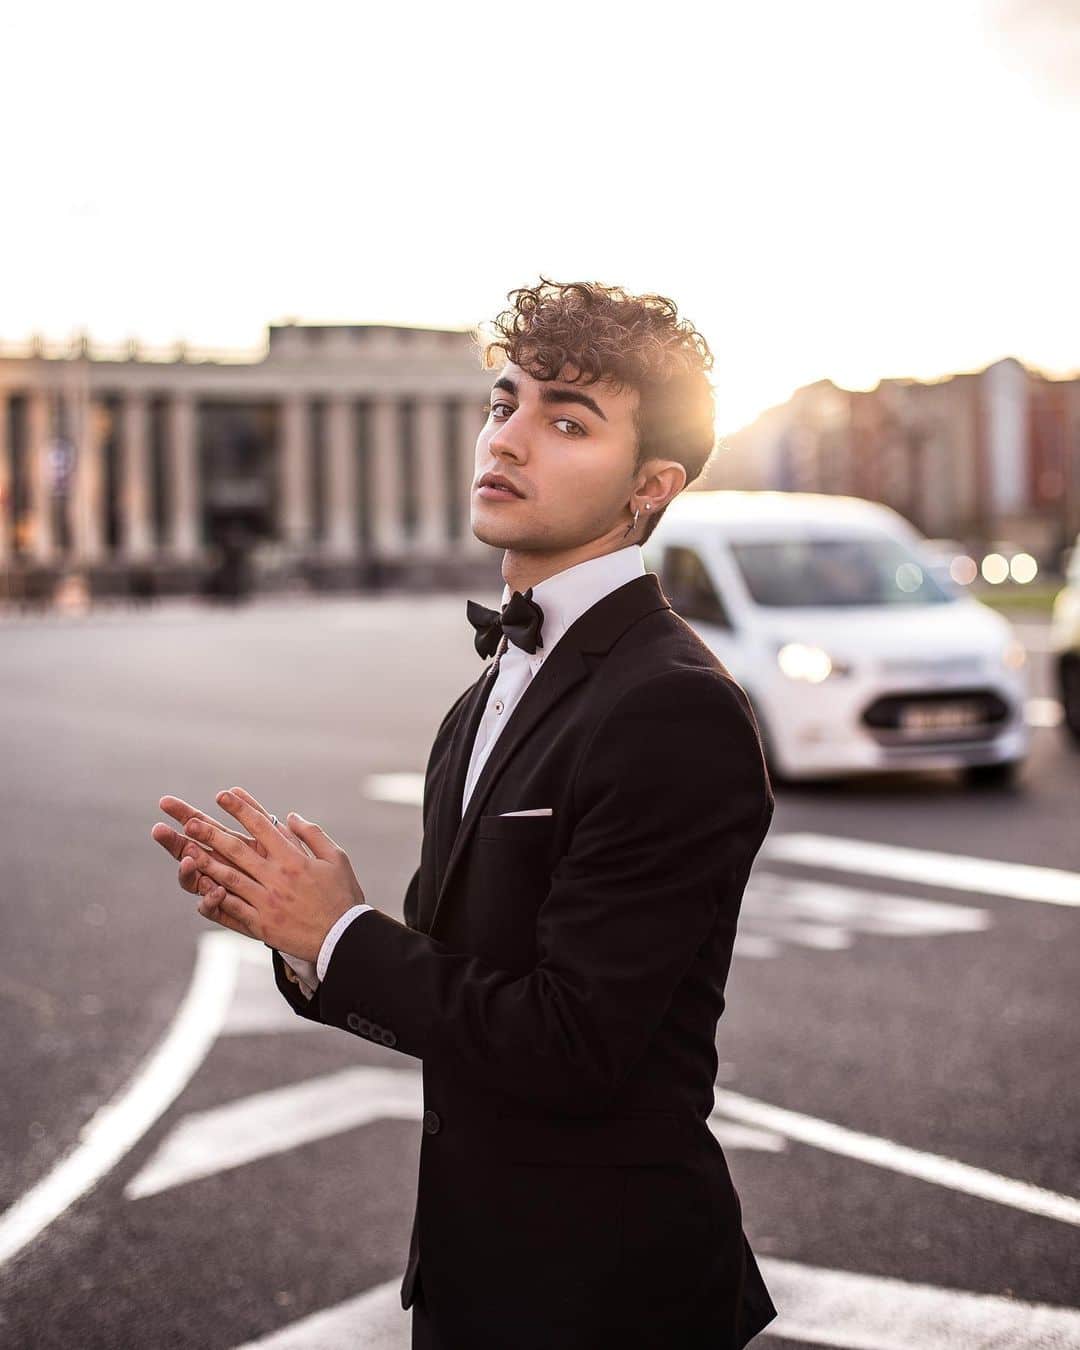 TikTok Star - Biography, Profile, Facts, and Career